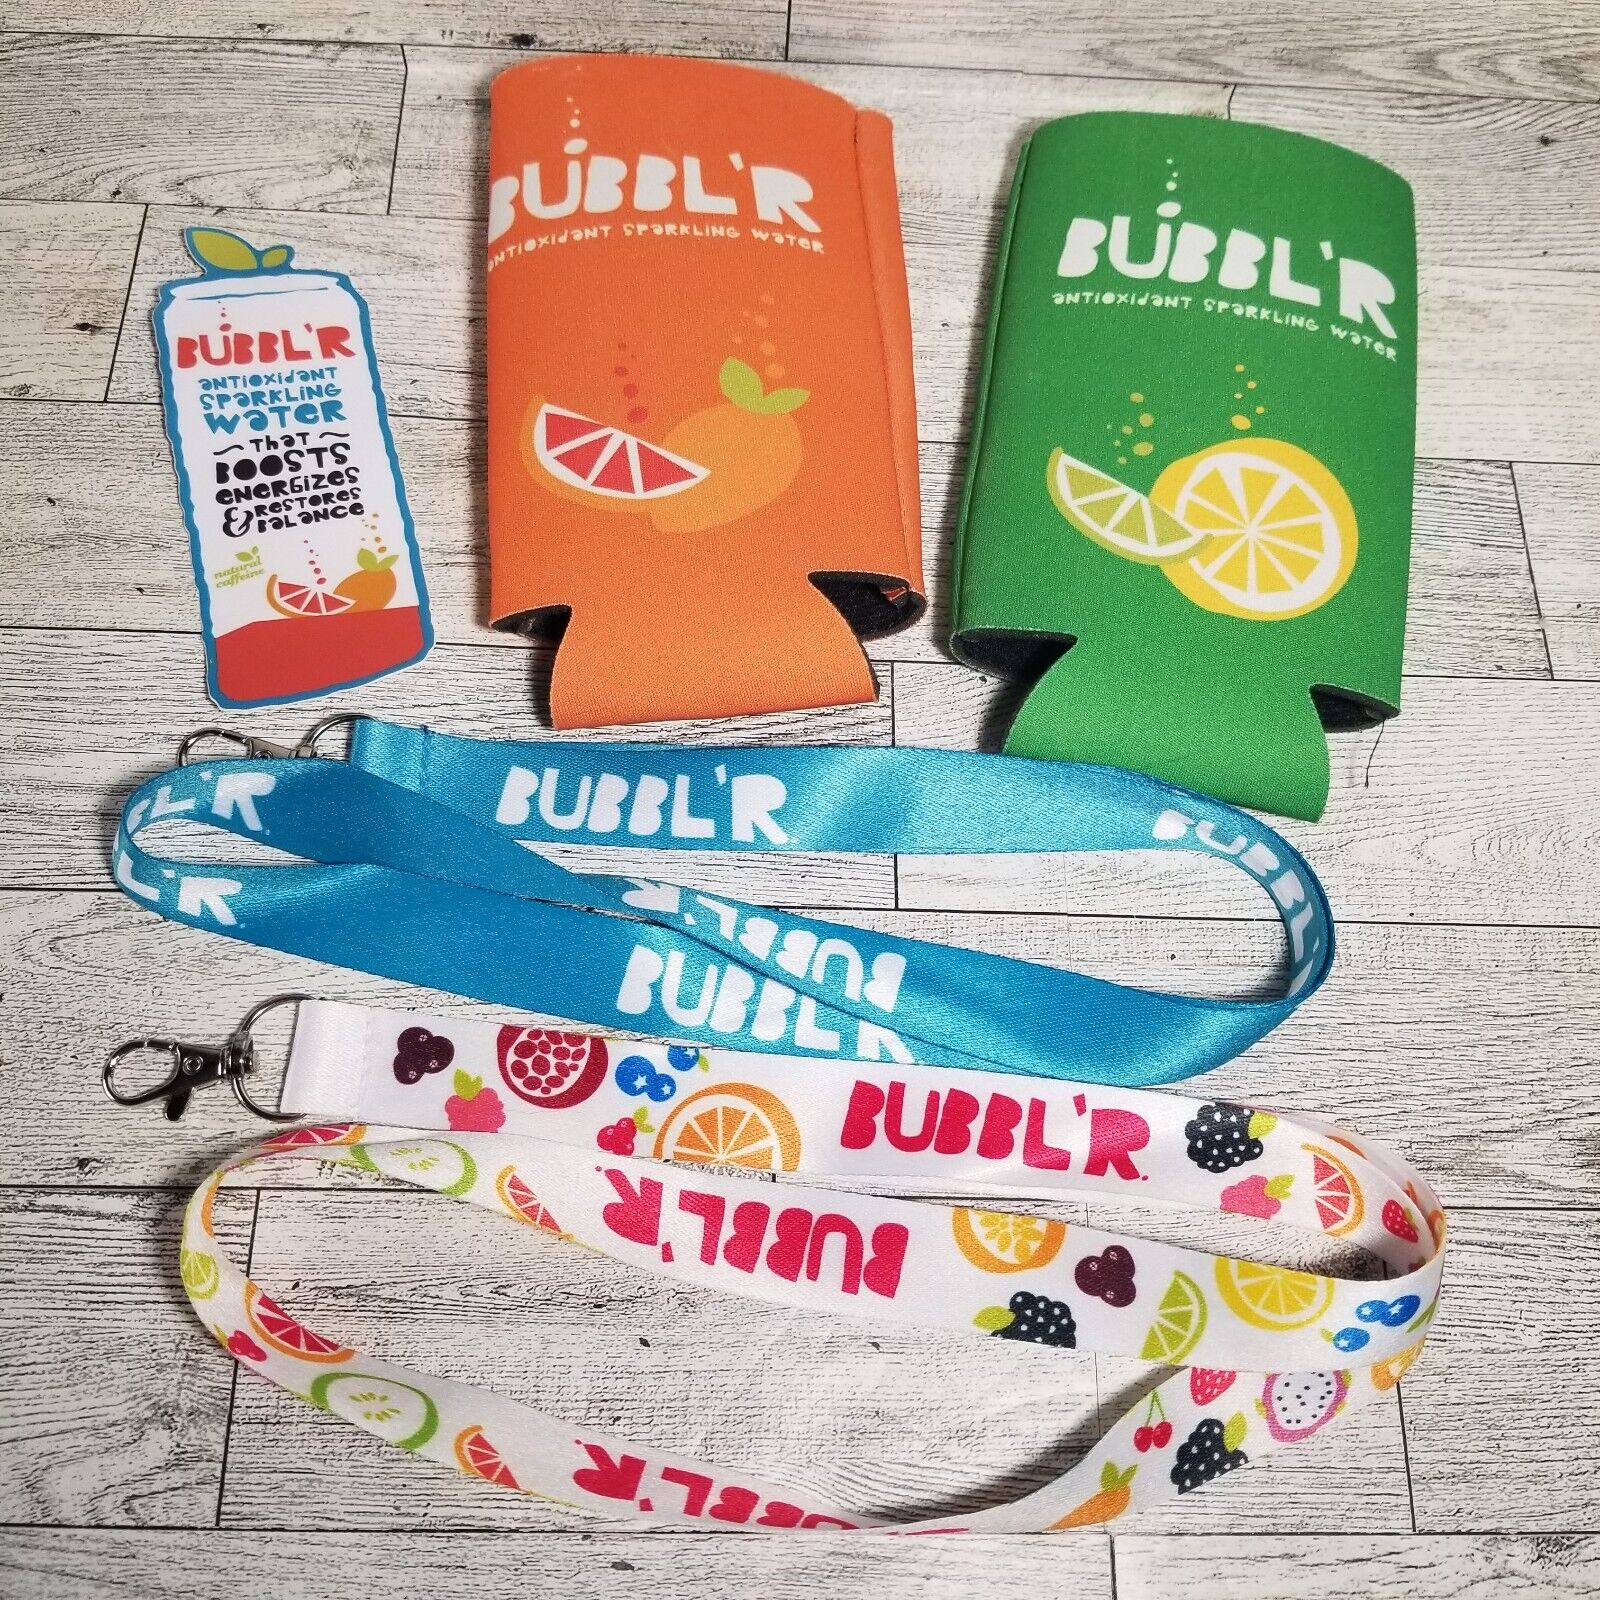 Bubbl'r Antioxidant Sparkling Water CAN Koozies Lanyards & Sticker NEW